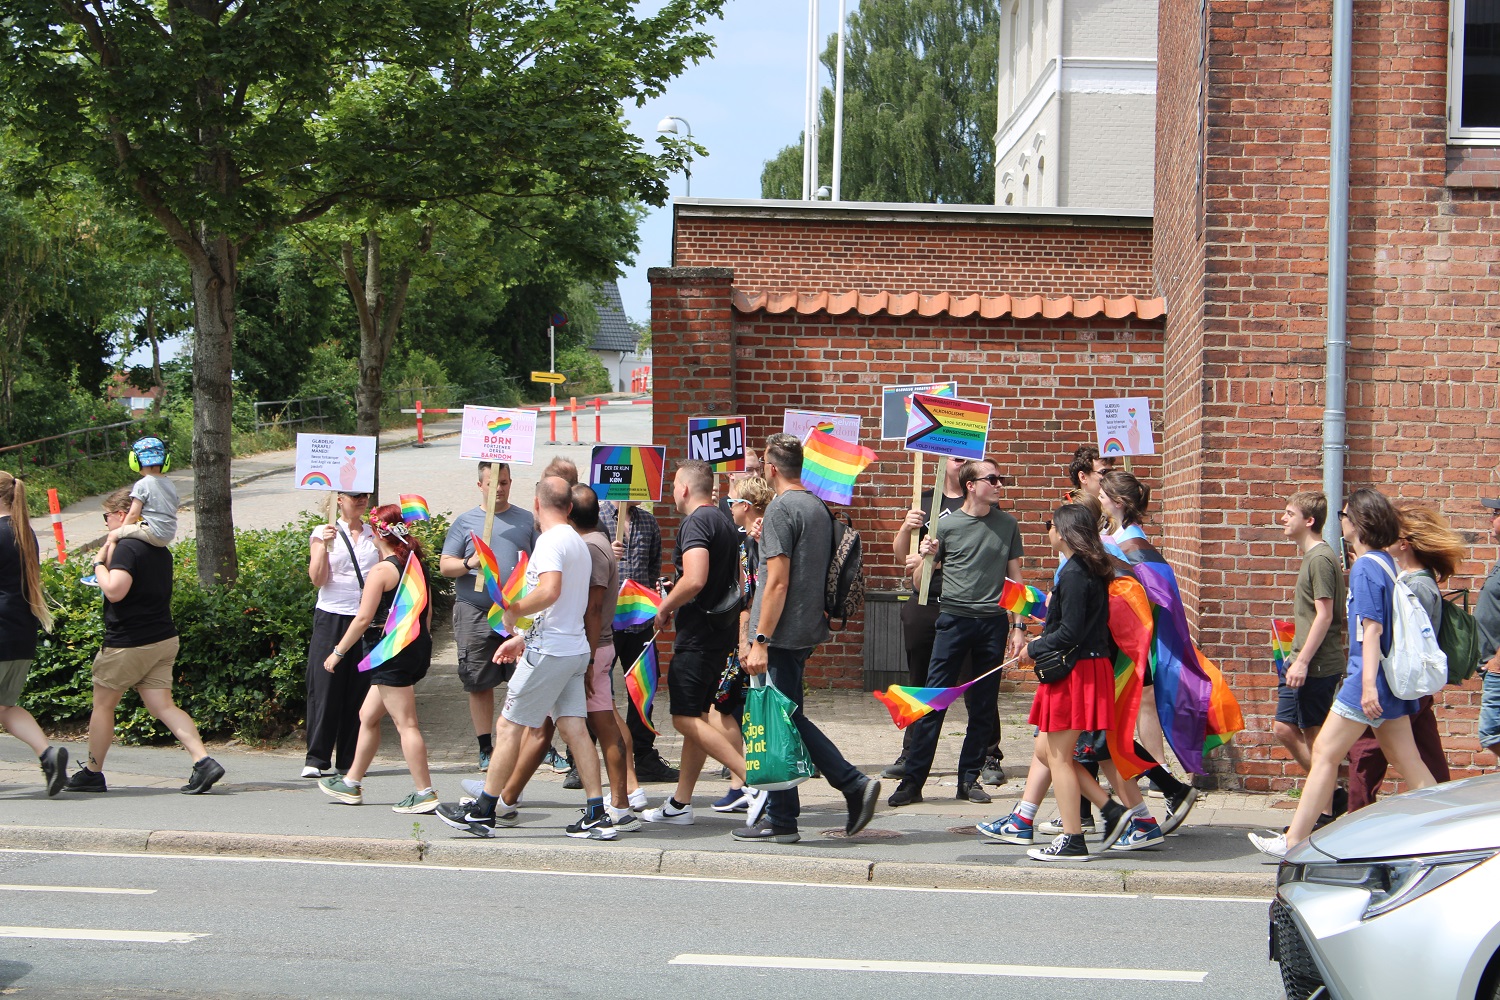 Nordic Resistance Movement Aabenraa Pride protest Denmark